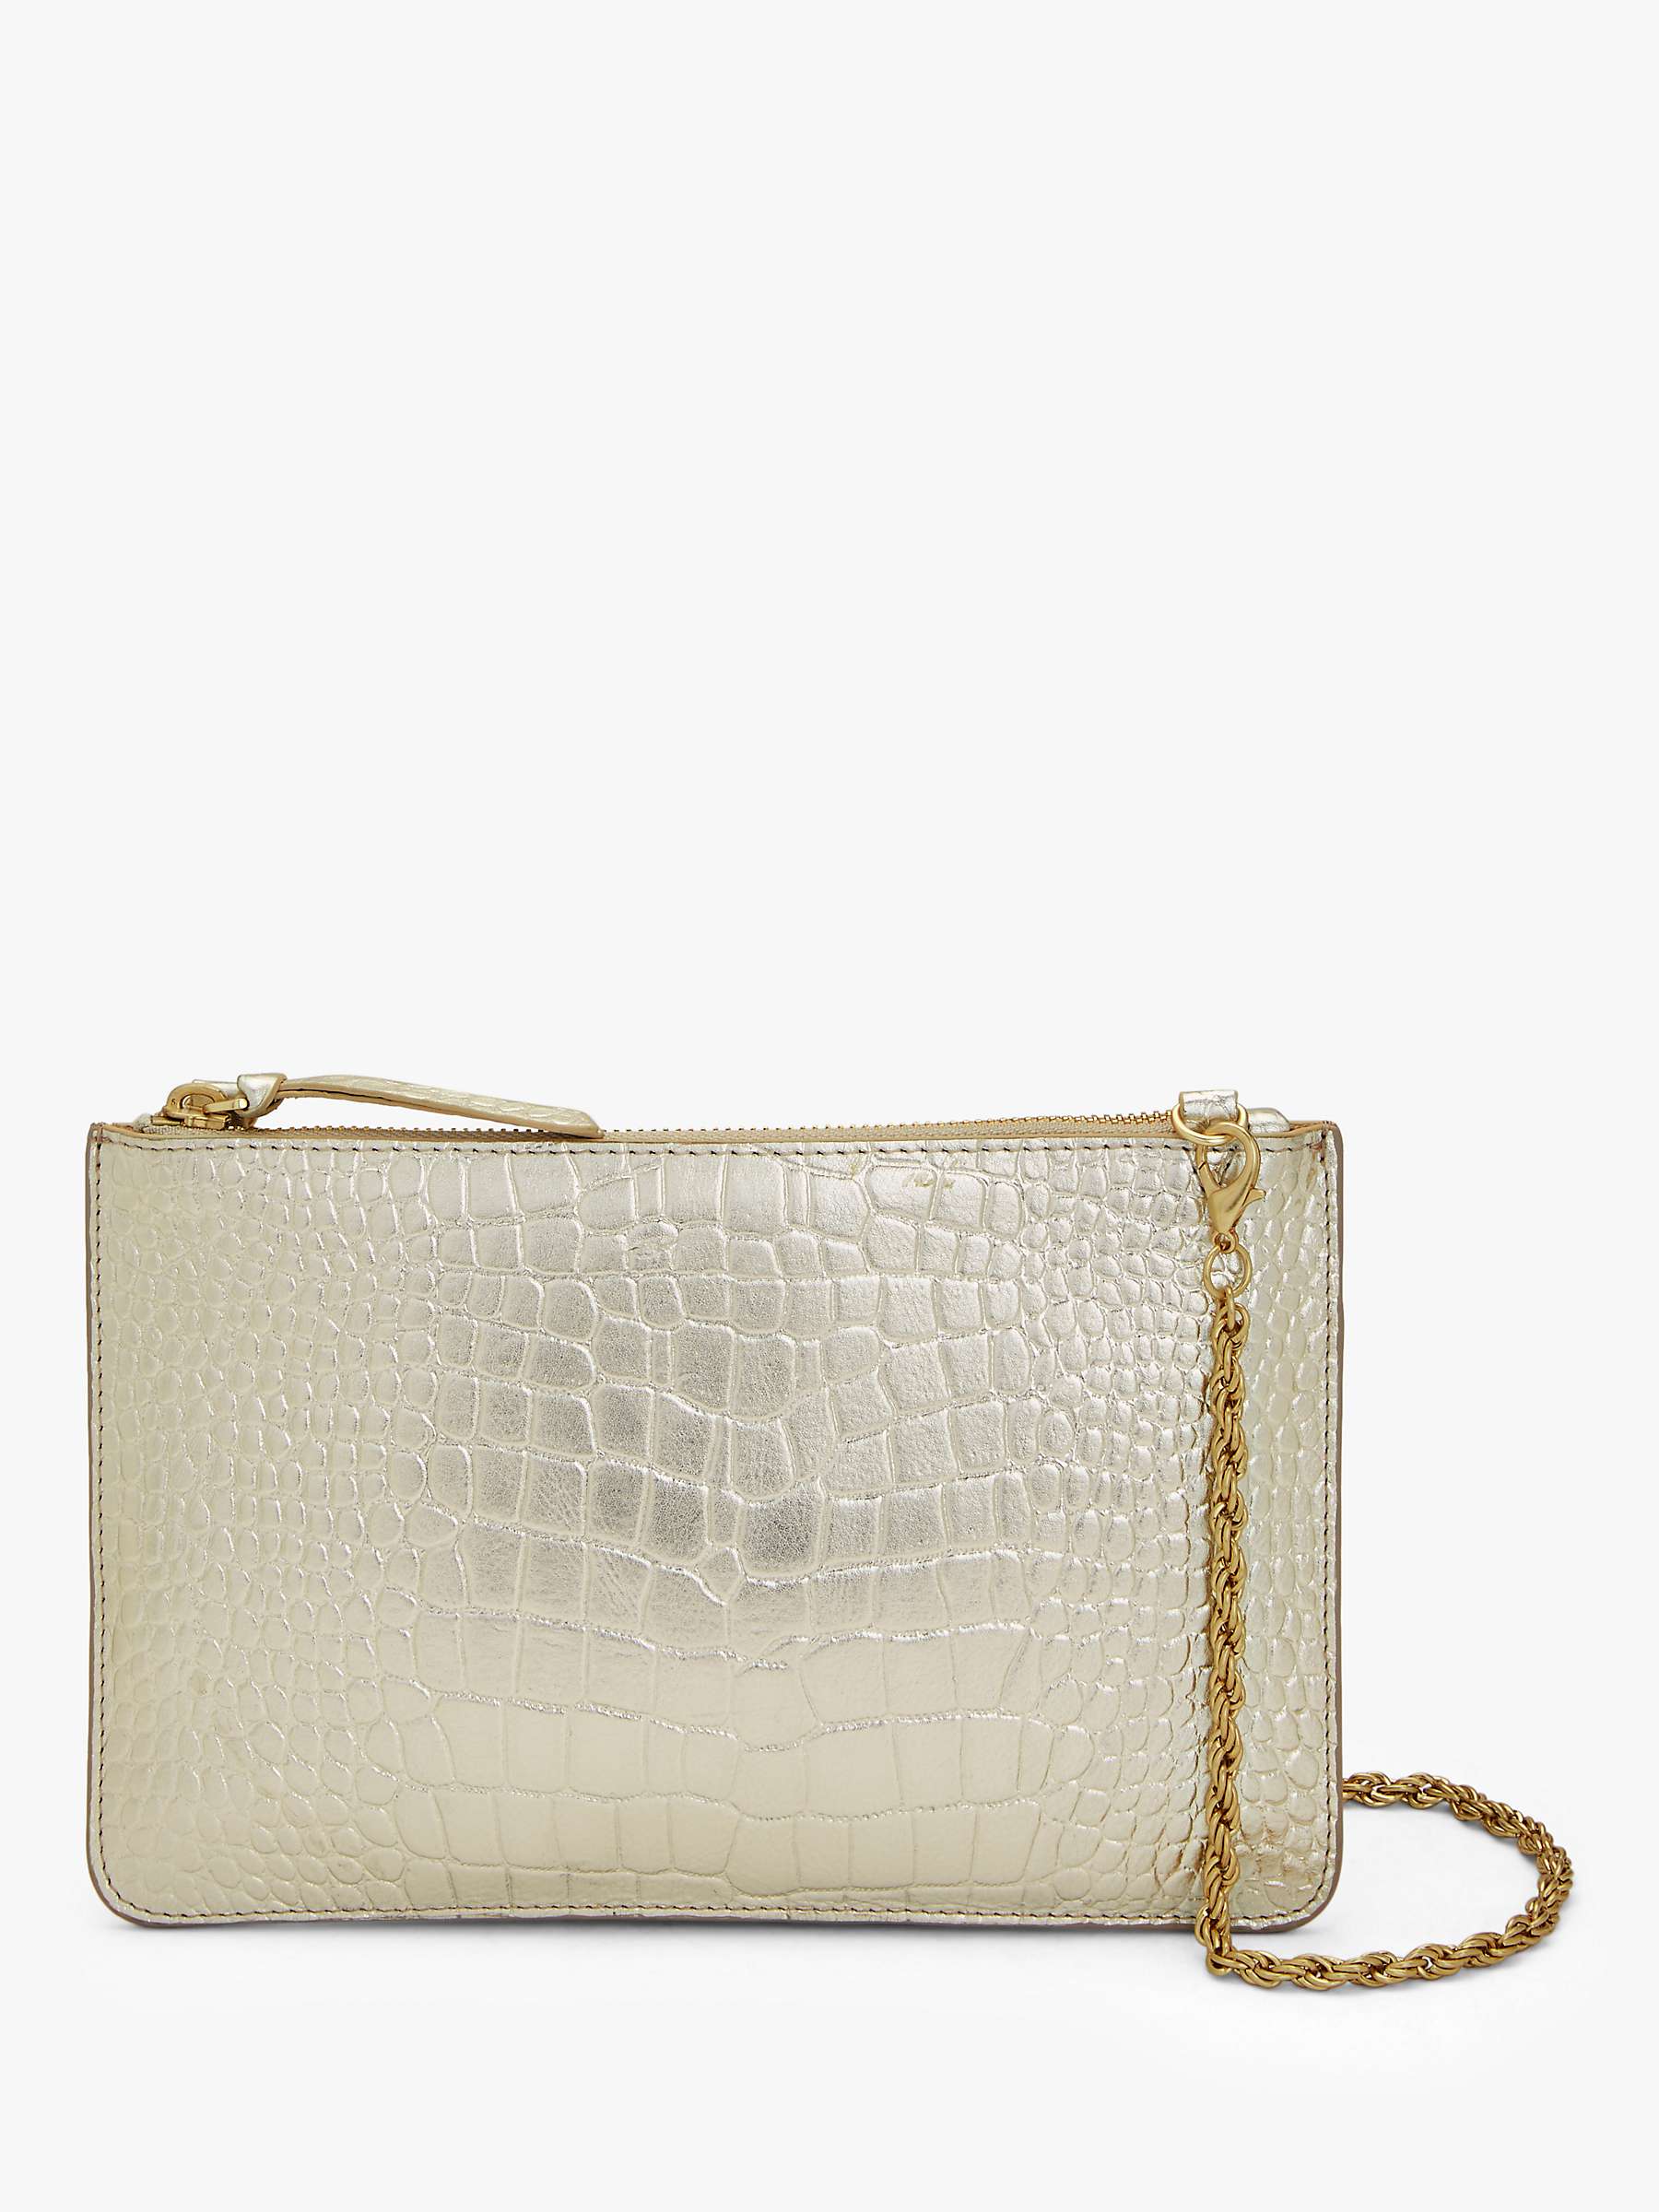 Ashley Furman In tafereel AND/OR Croc Embossed Leather Cross Body Clutch Bag, Gold at John Lewis &  Partners